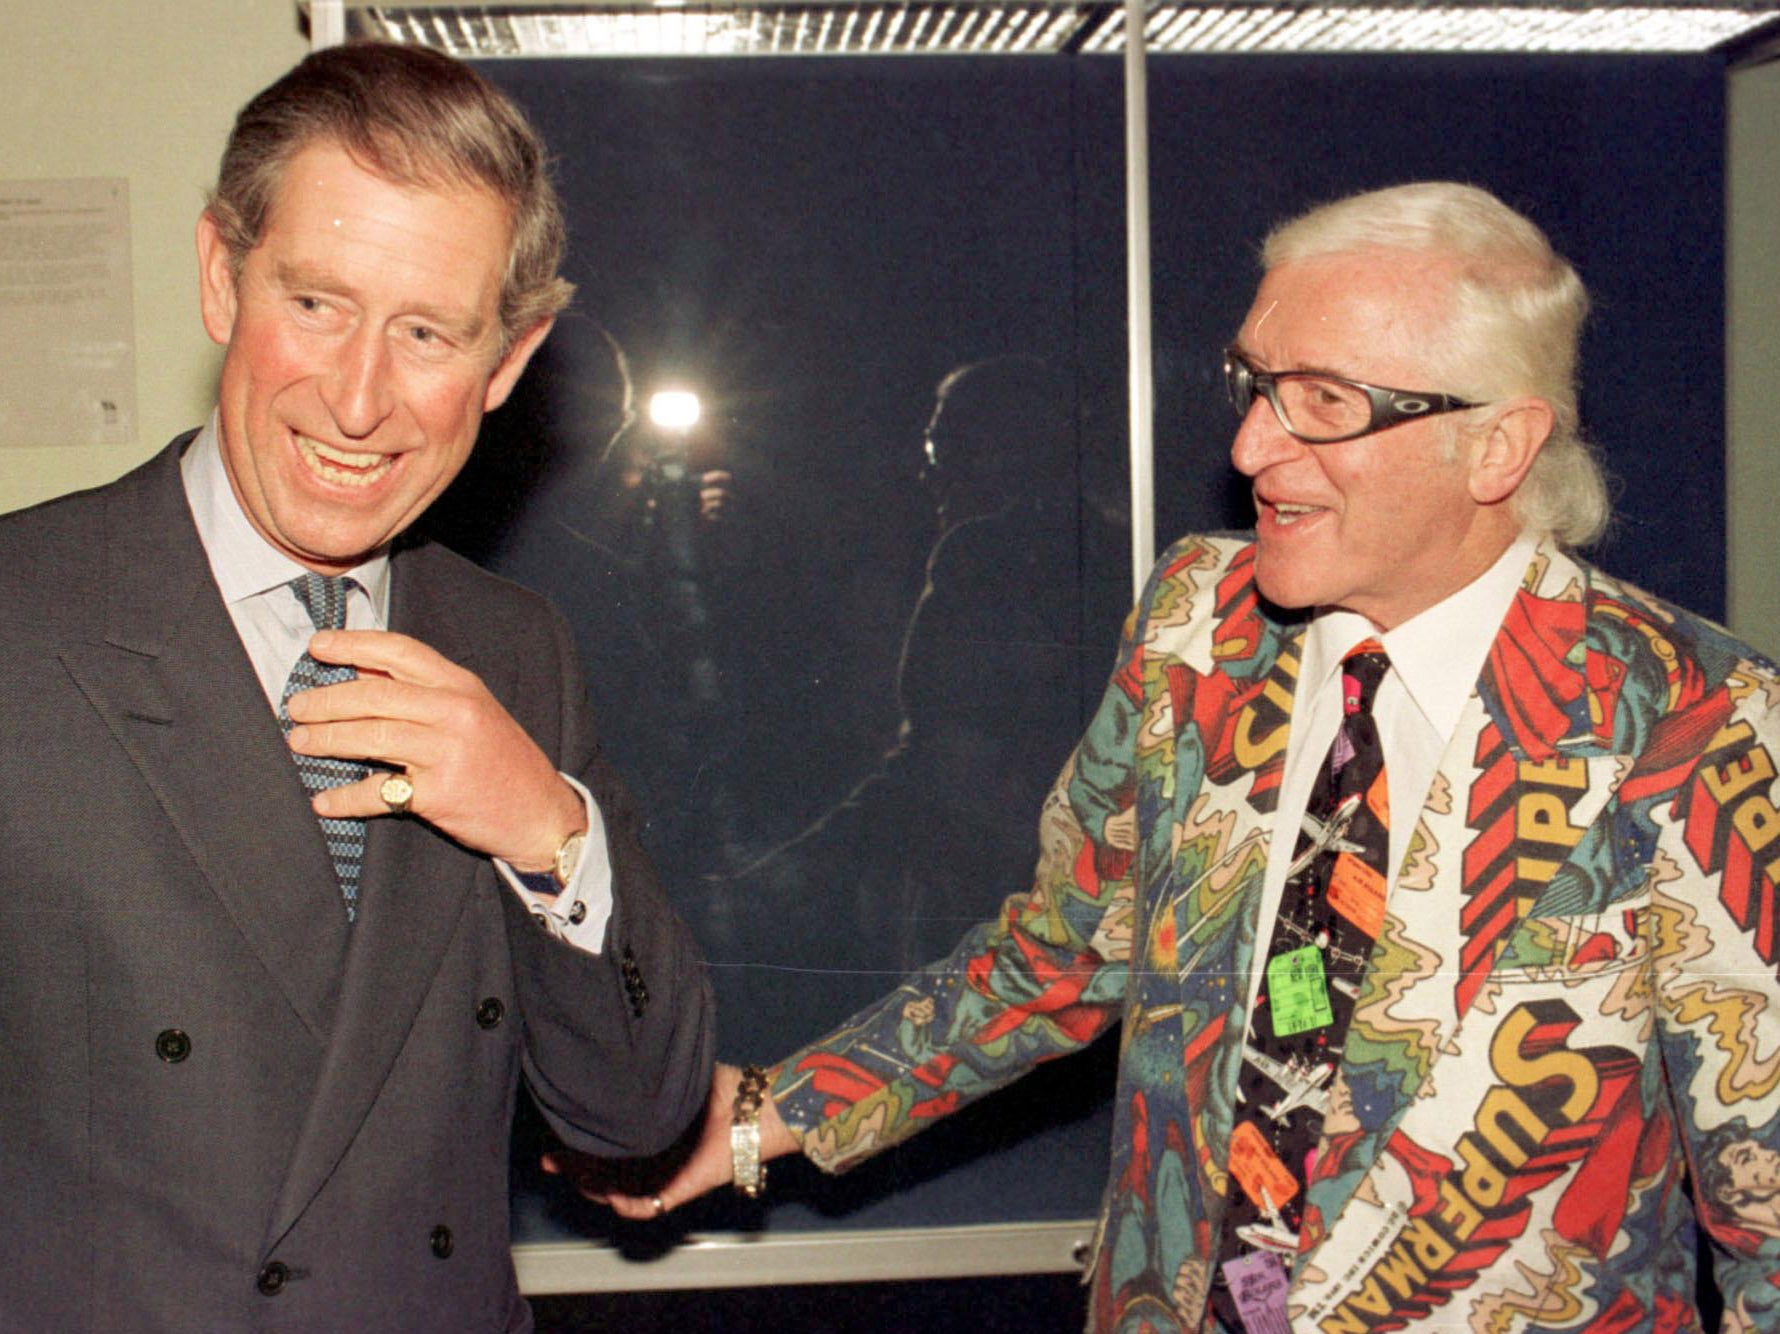 New documentary shines light on letters between Prince Charles and Jimmy Savile